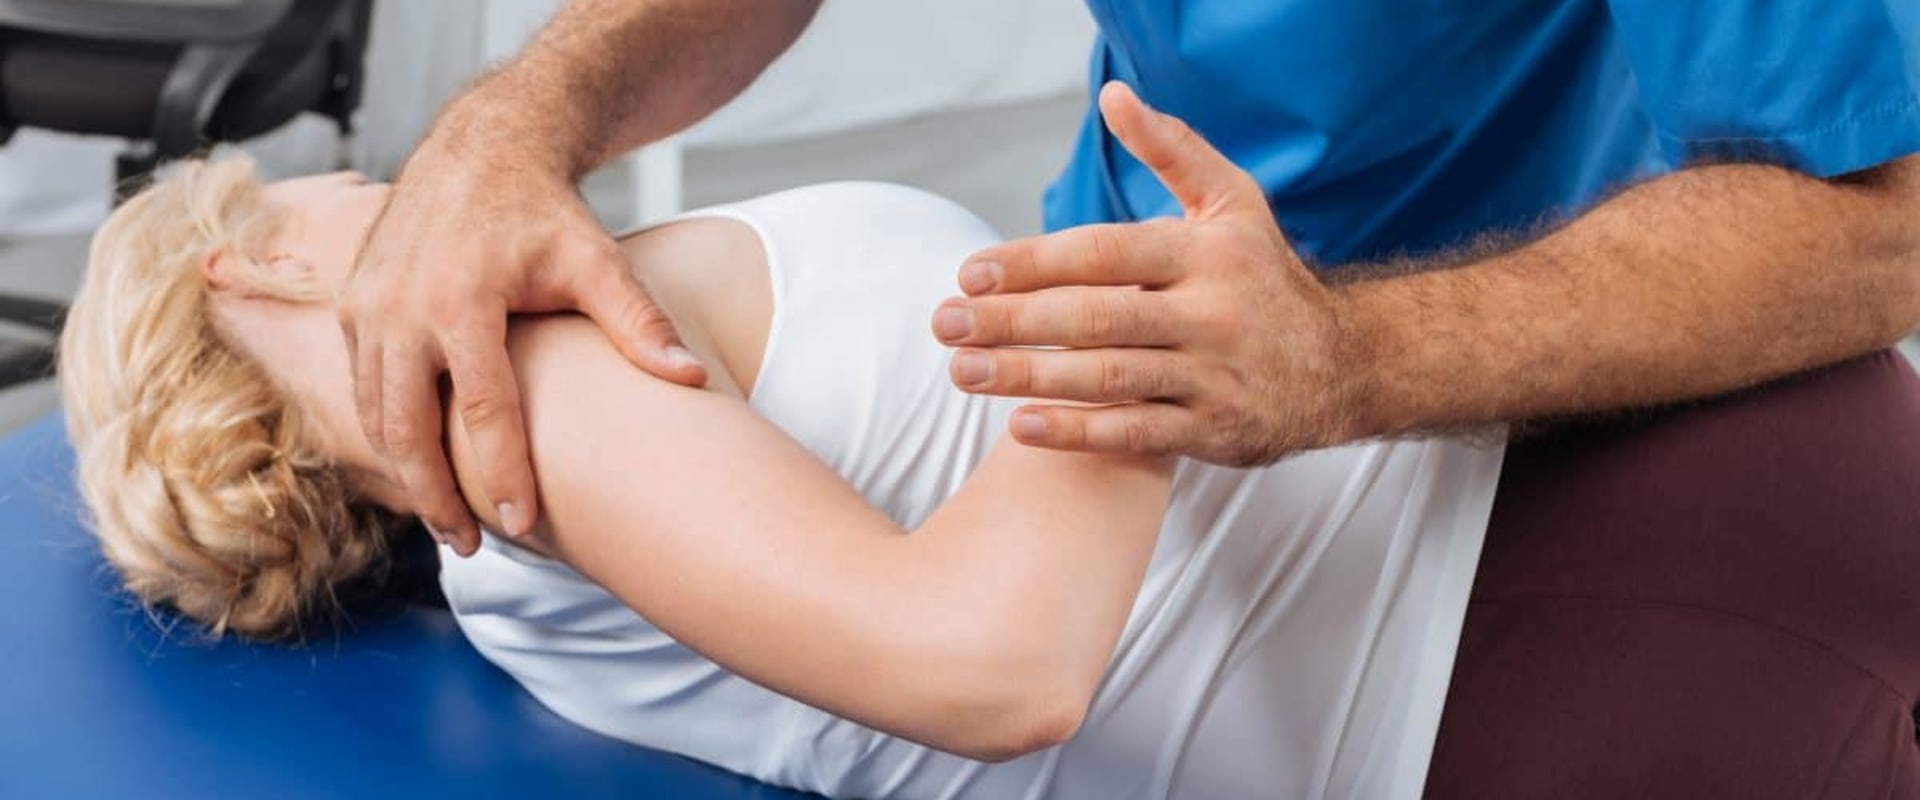 How often should chiropractic care be done?